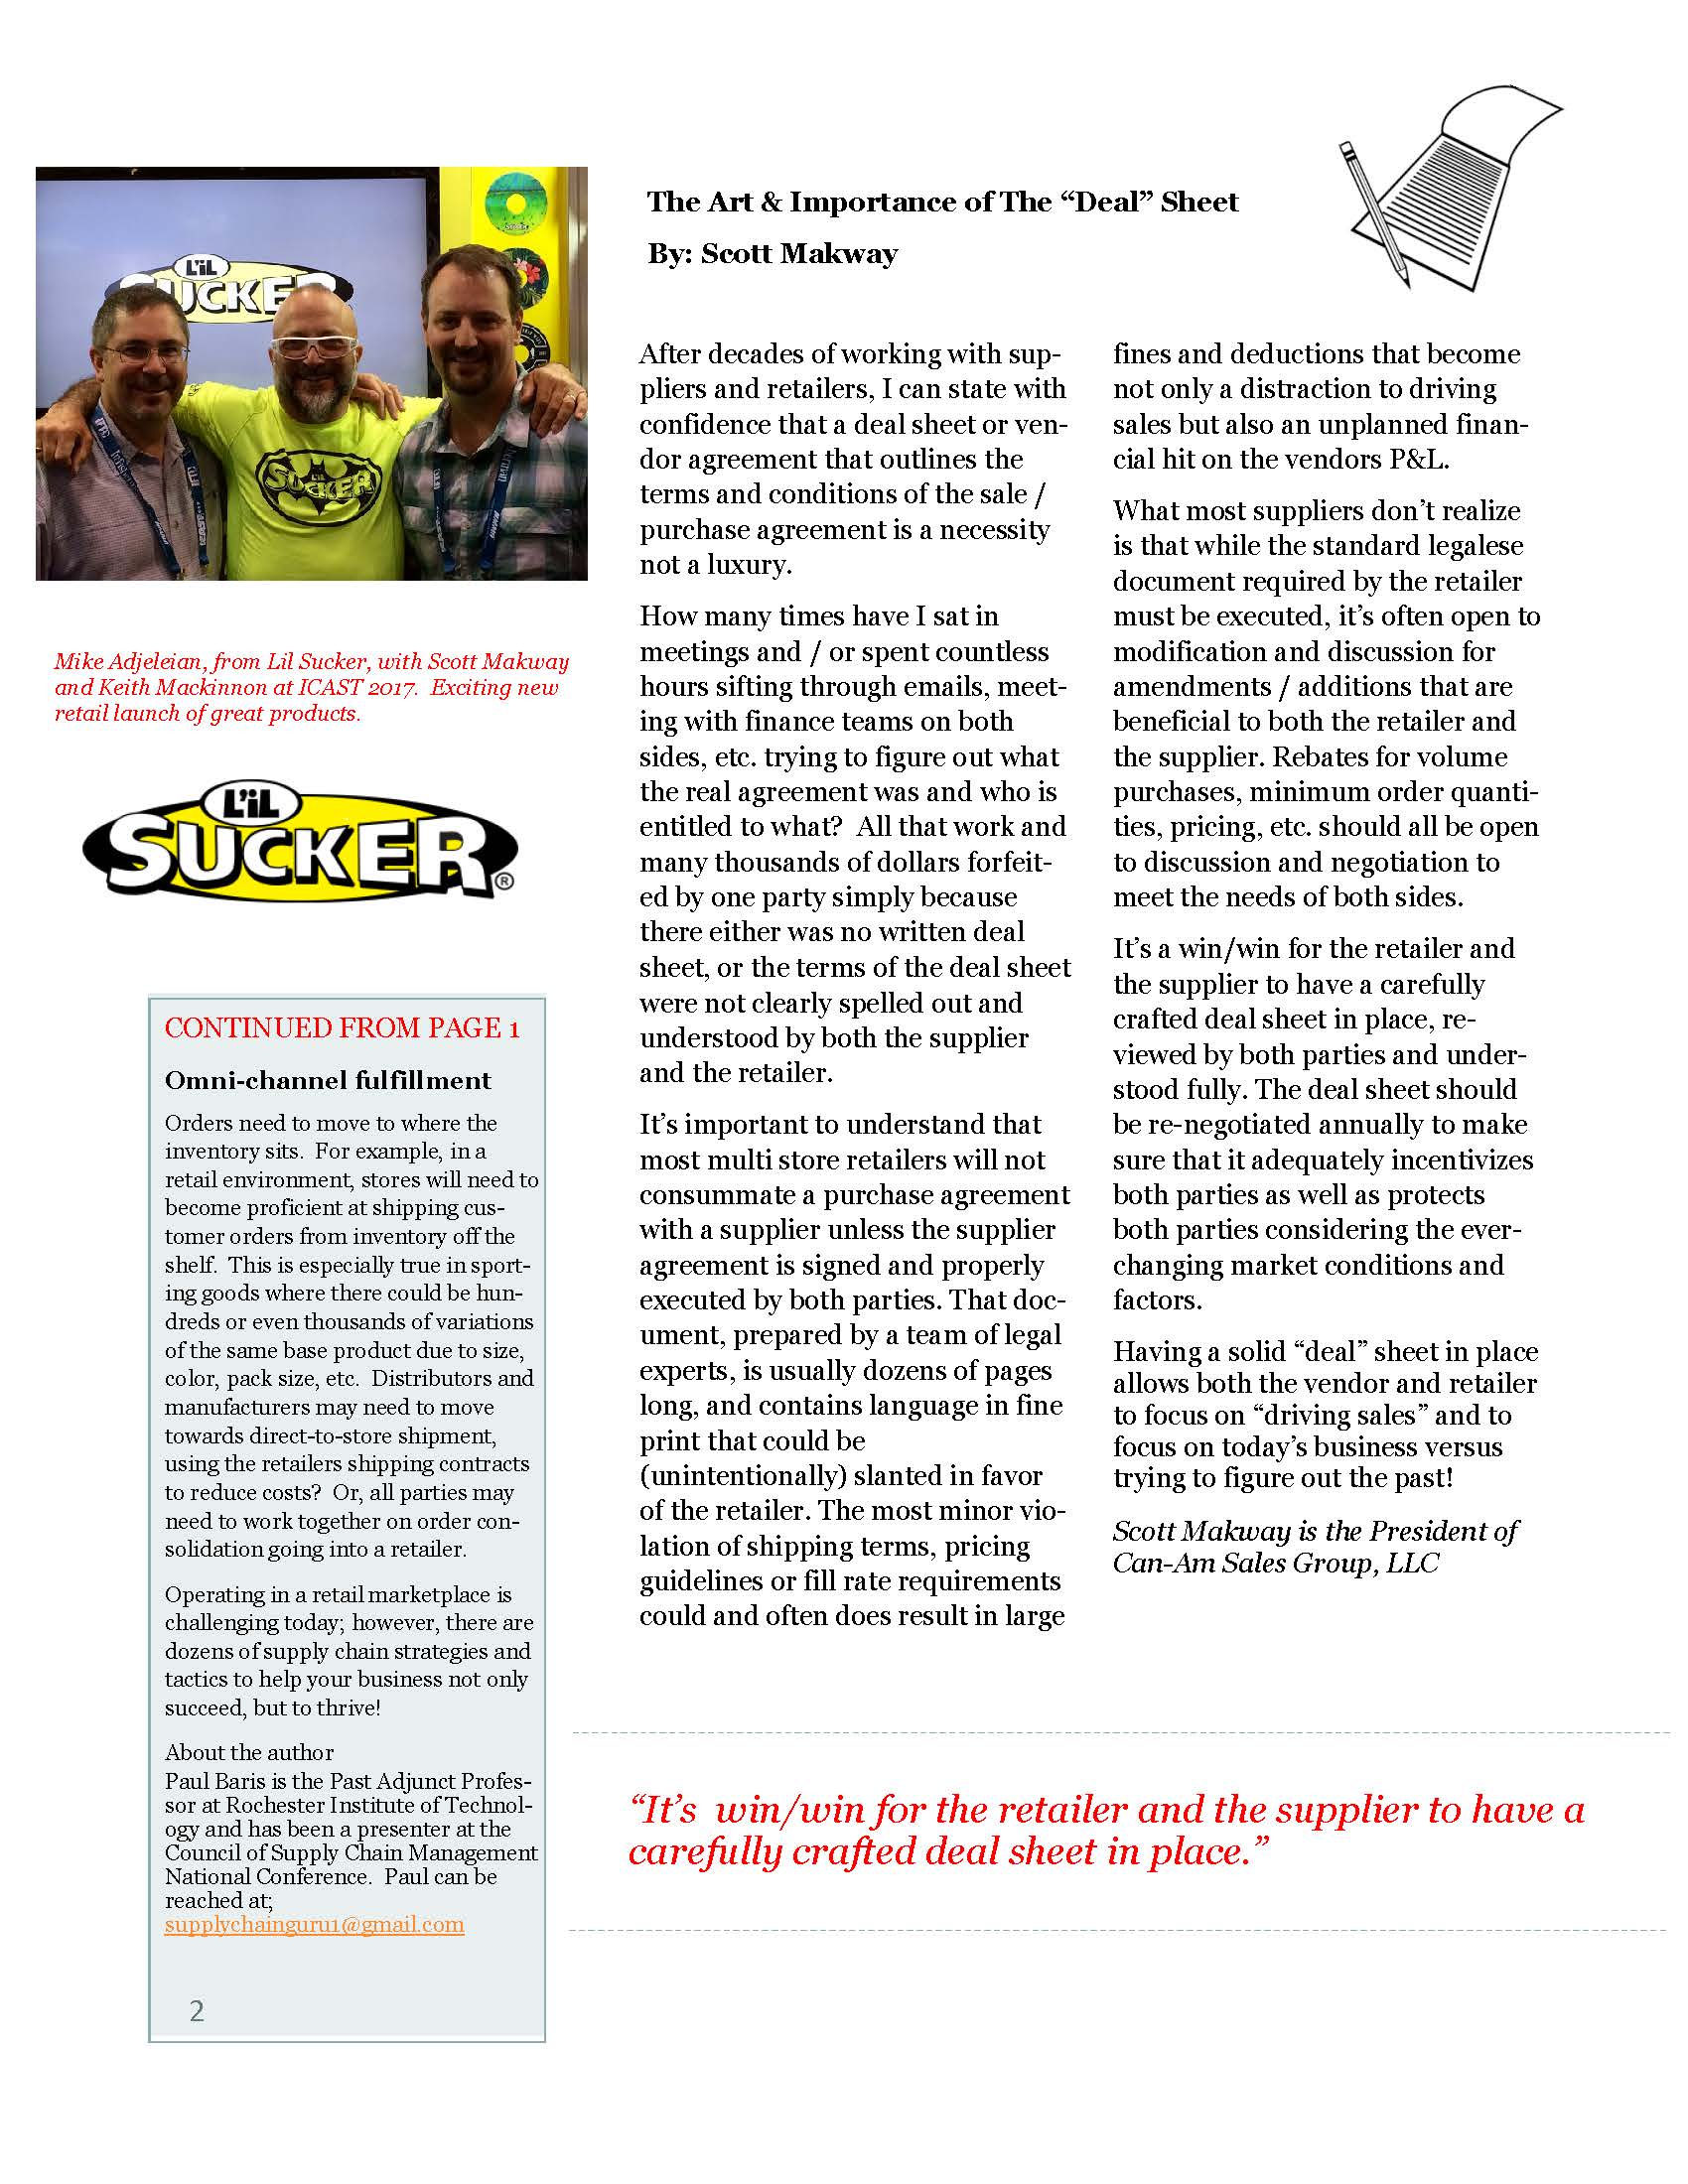 CanAm Newsletter Volume 1, Page 2